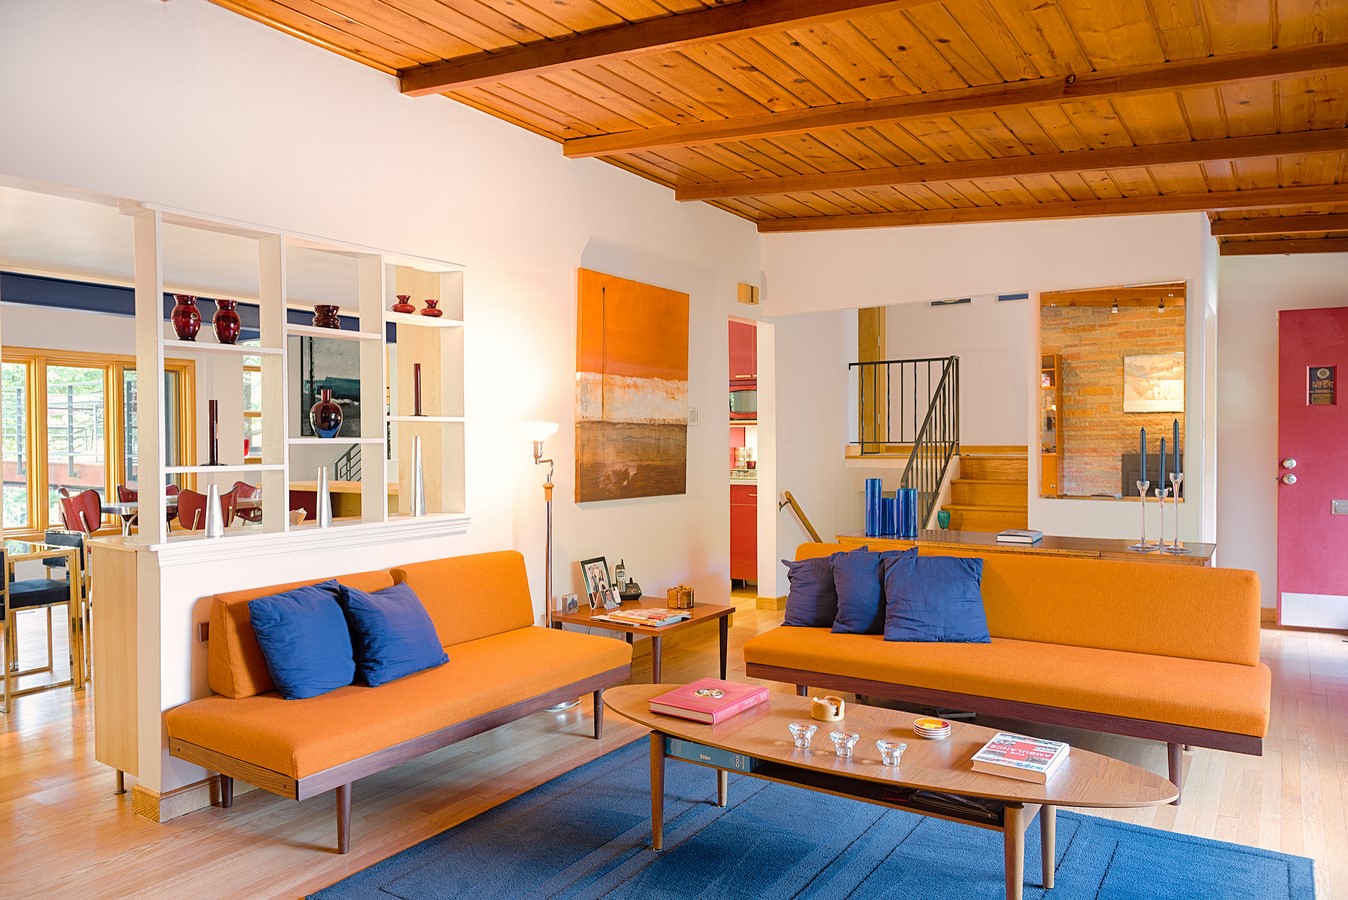 A3978 30 Examples Of Split Complementary Color Scheme In Interiors IMAGE 6 